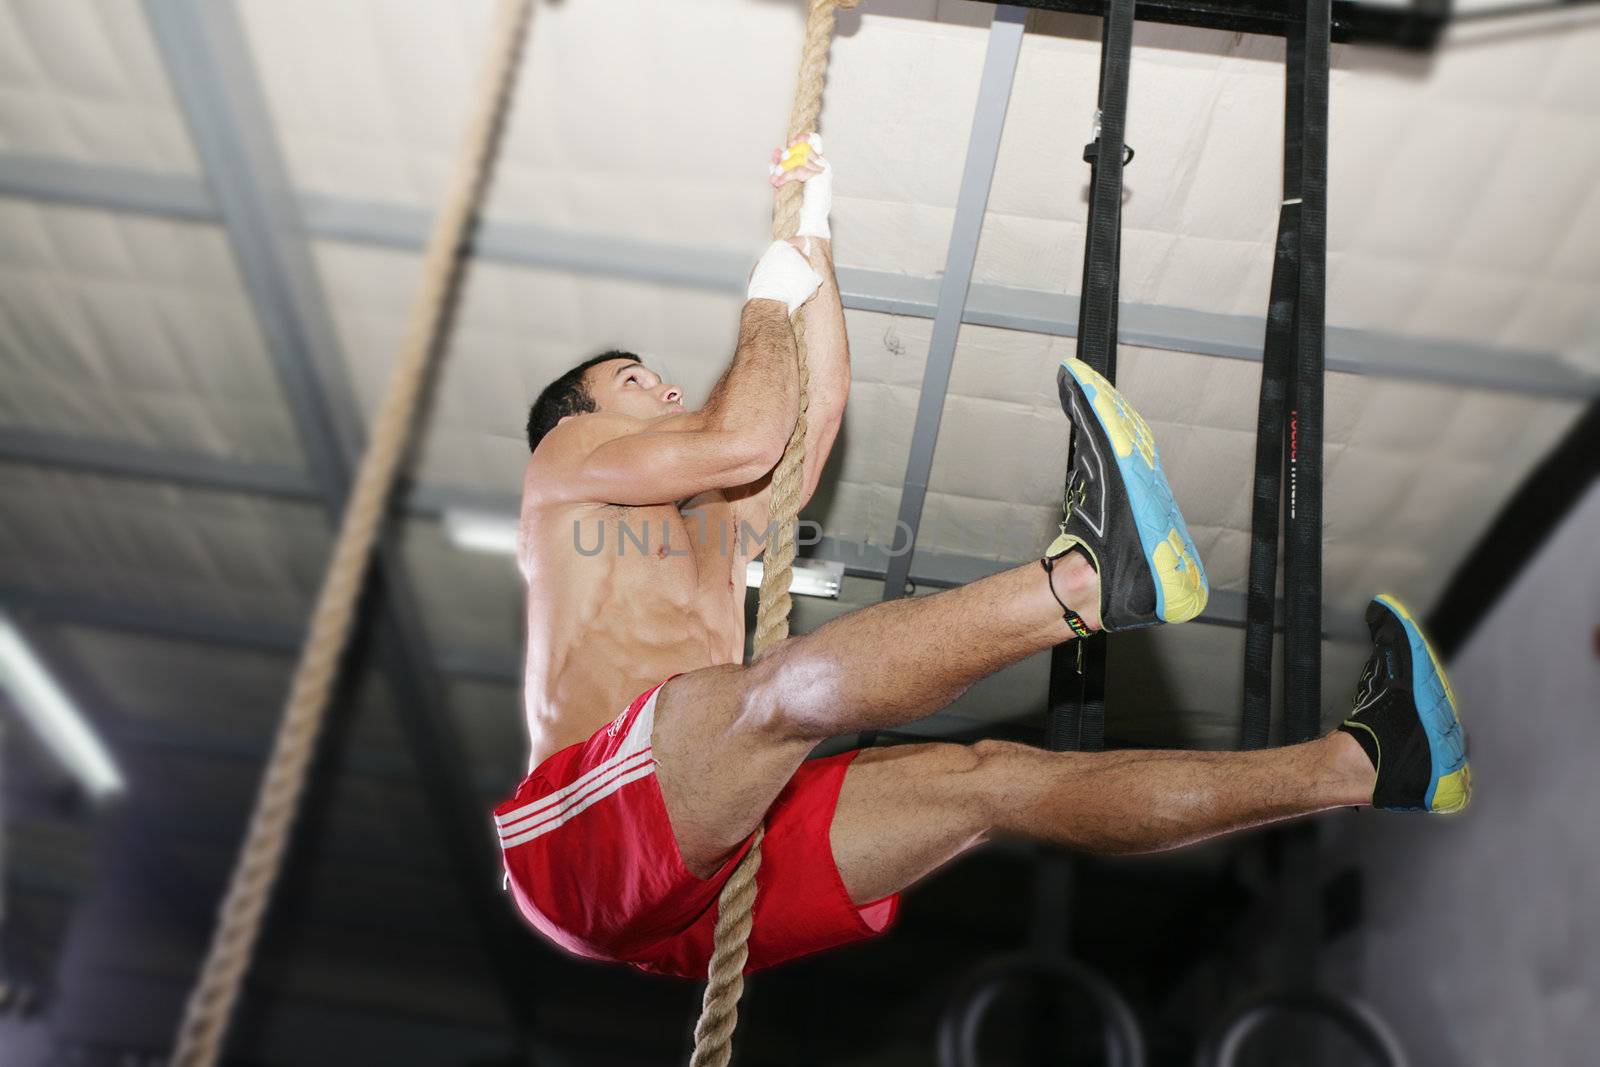 Crossfit rope climb exercise. Focus in the body